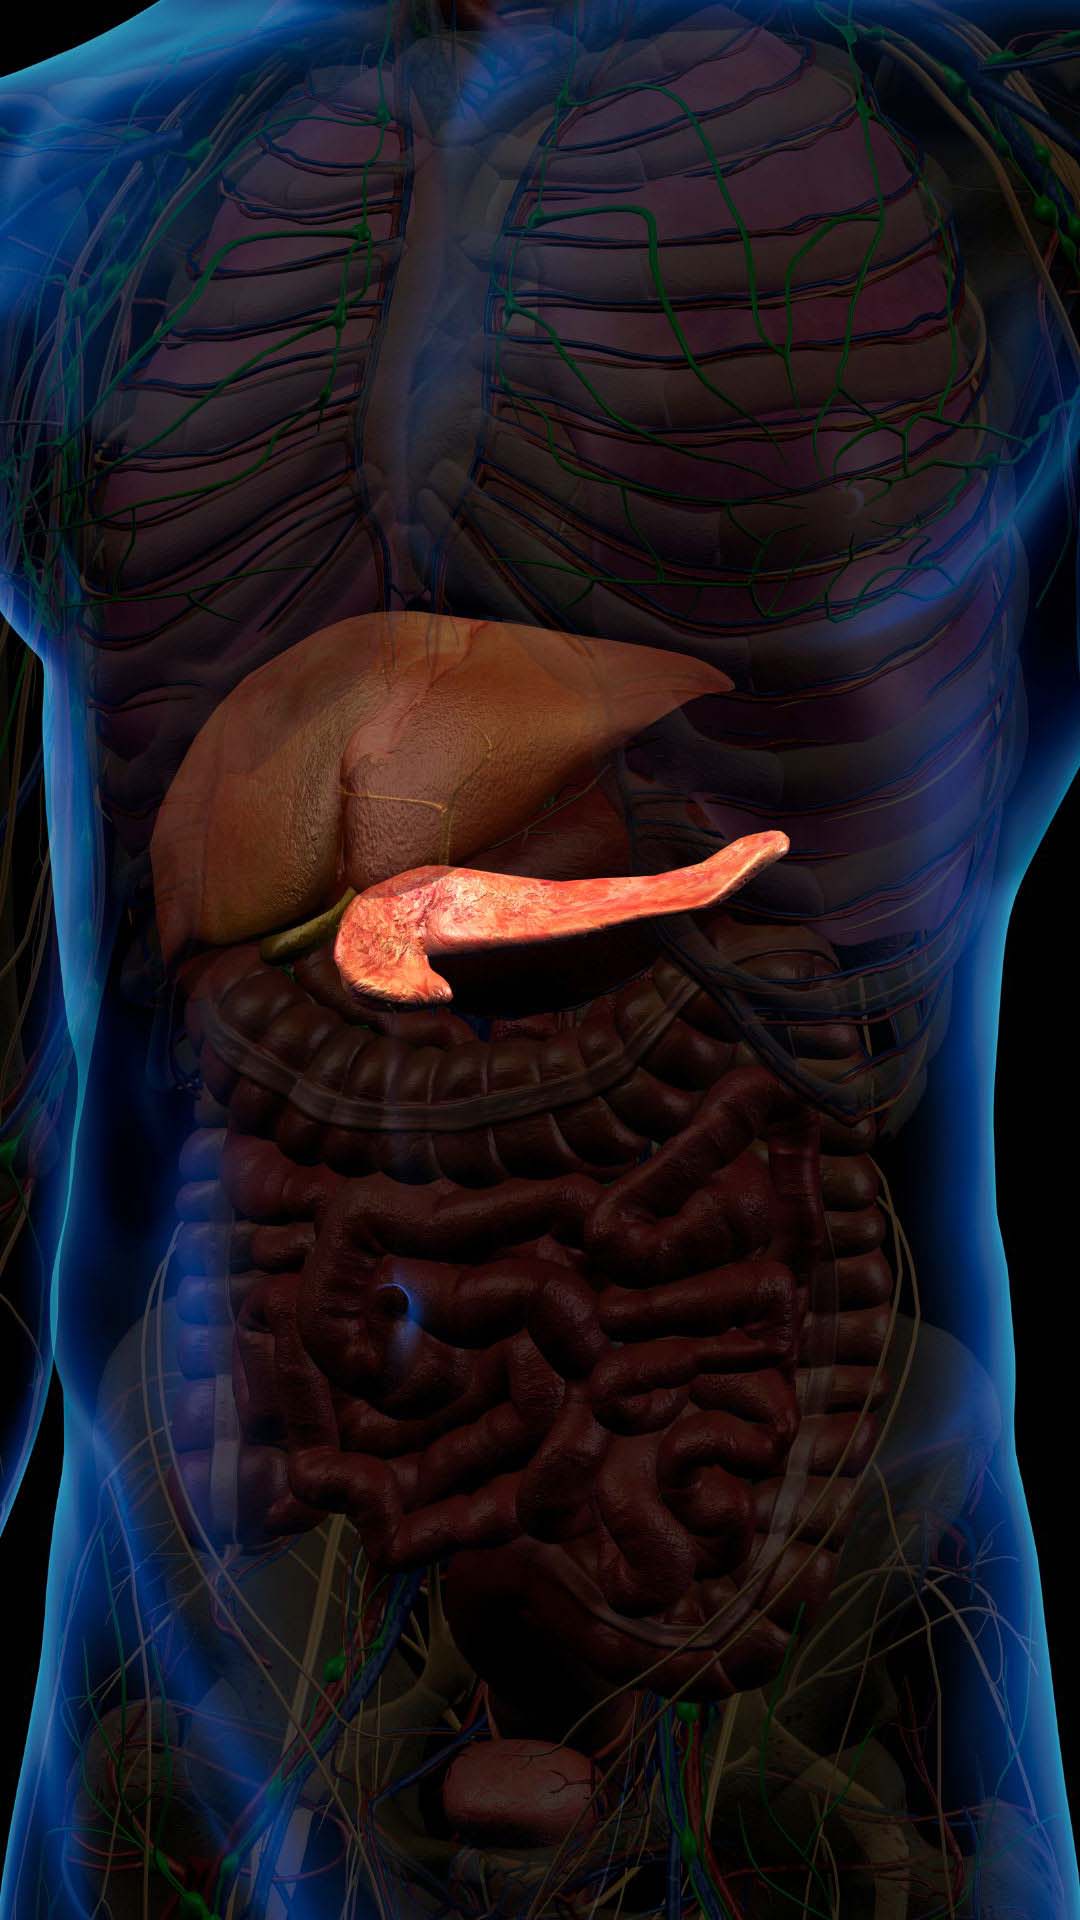 pancreas illustration demonstrating the pancreatic cysts the pancreatic surgeons at SCMSC will treat at their office in Los Angeles.